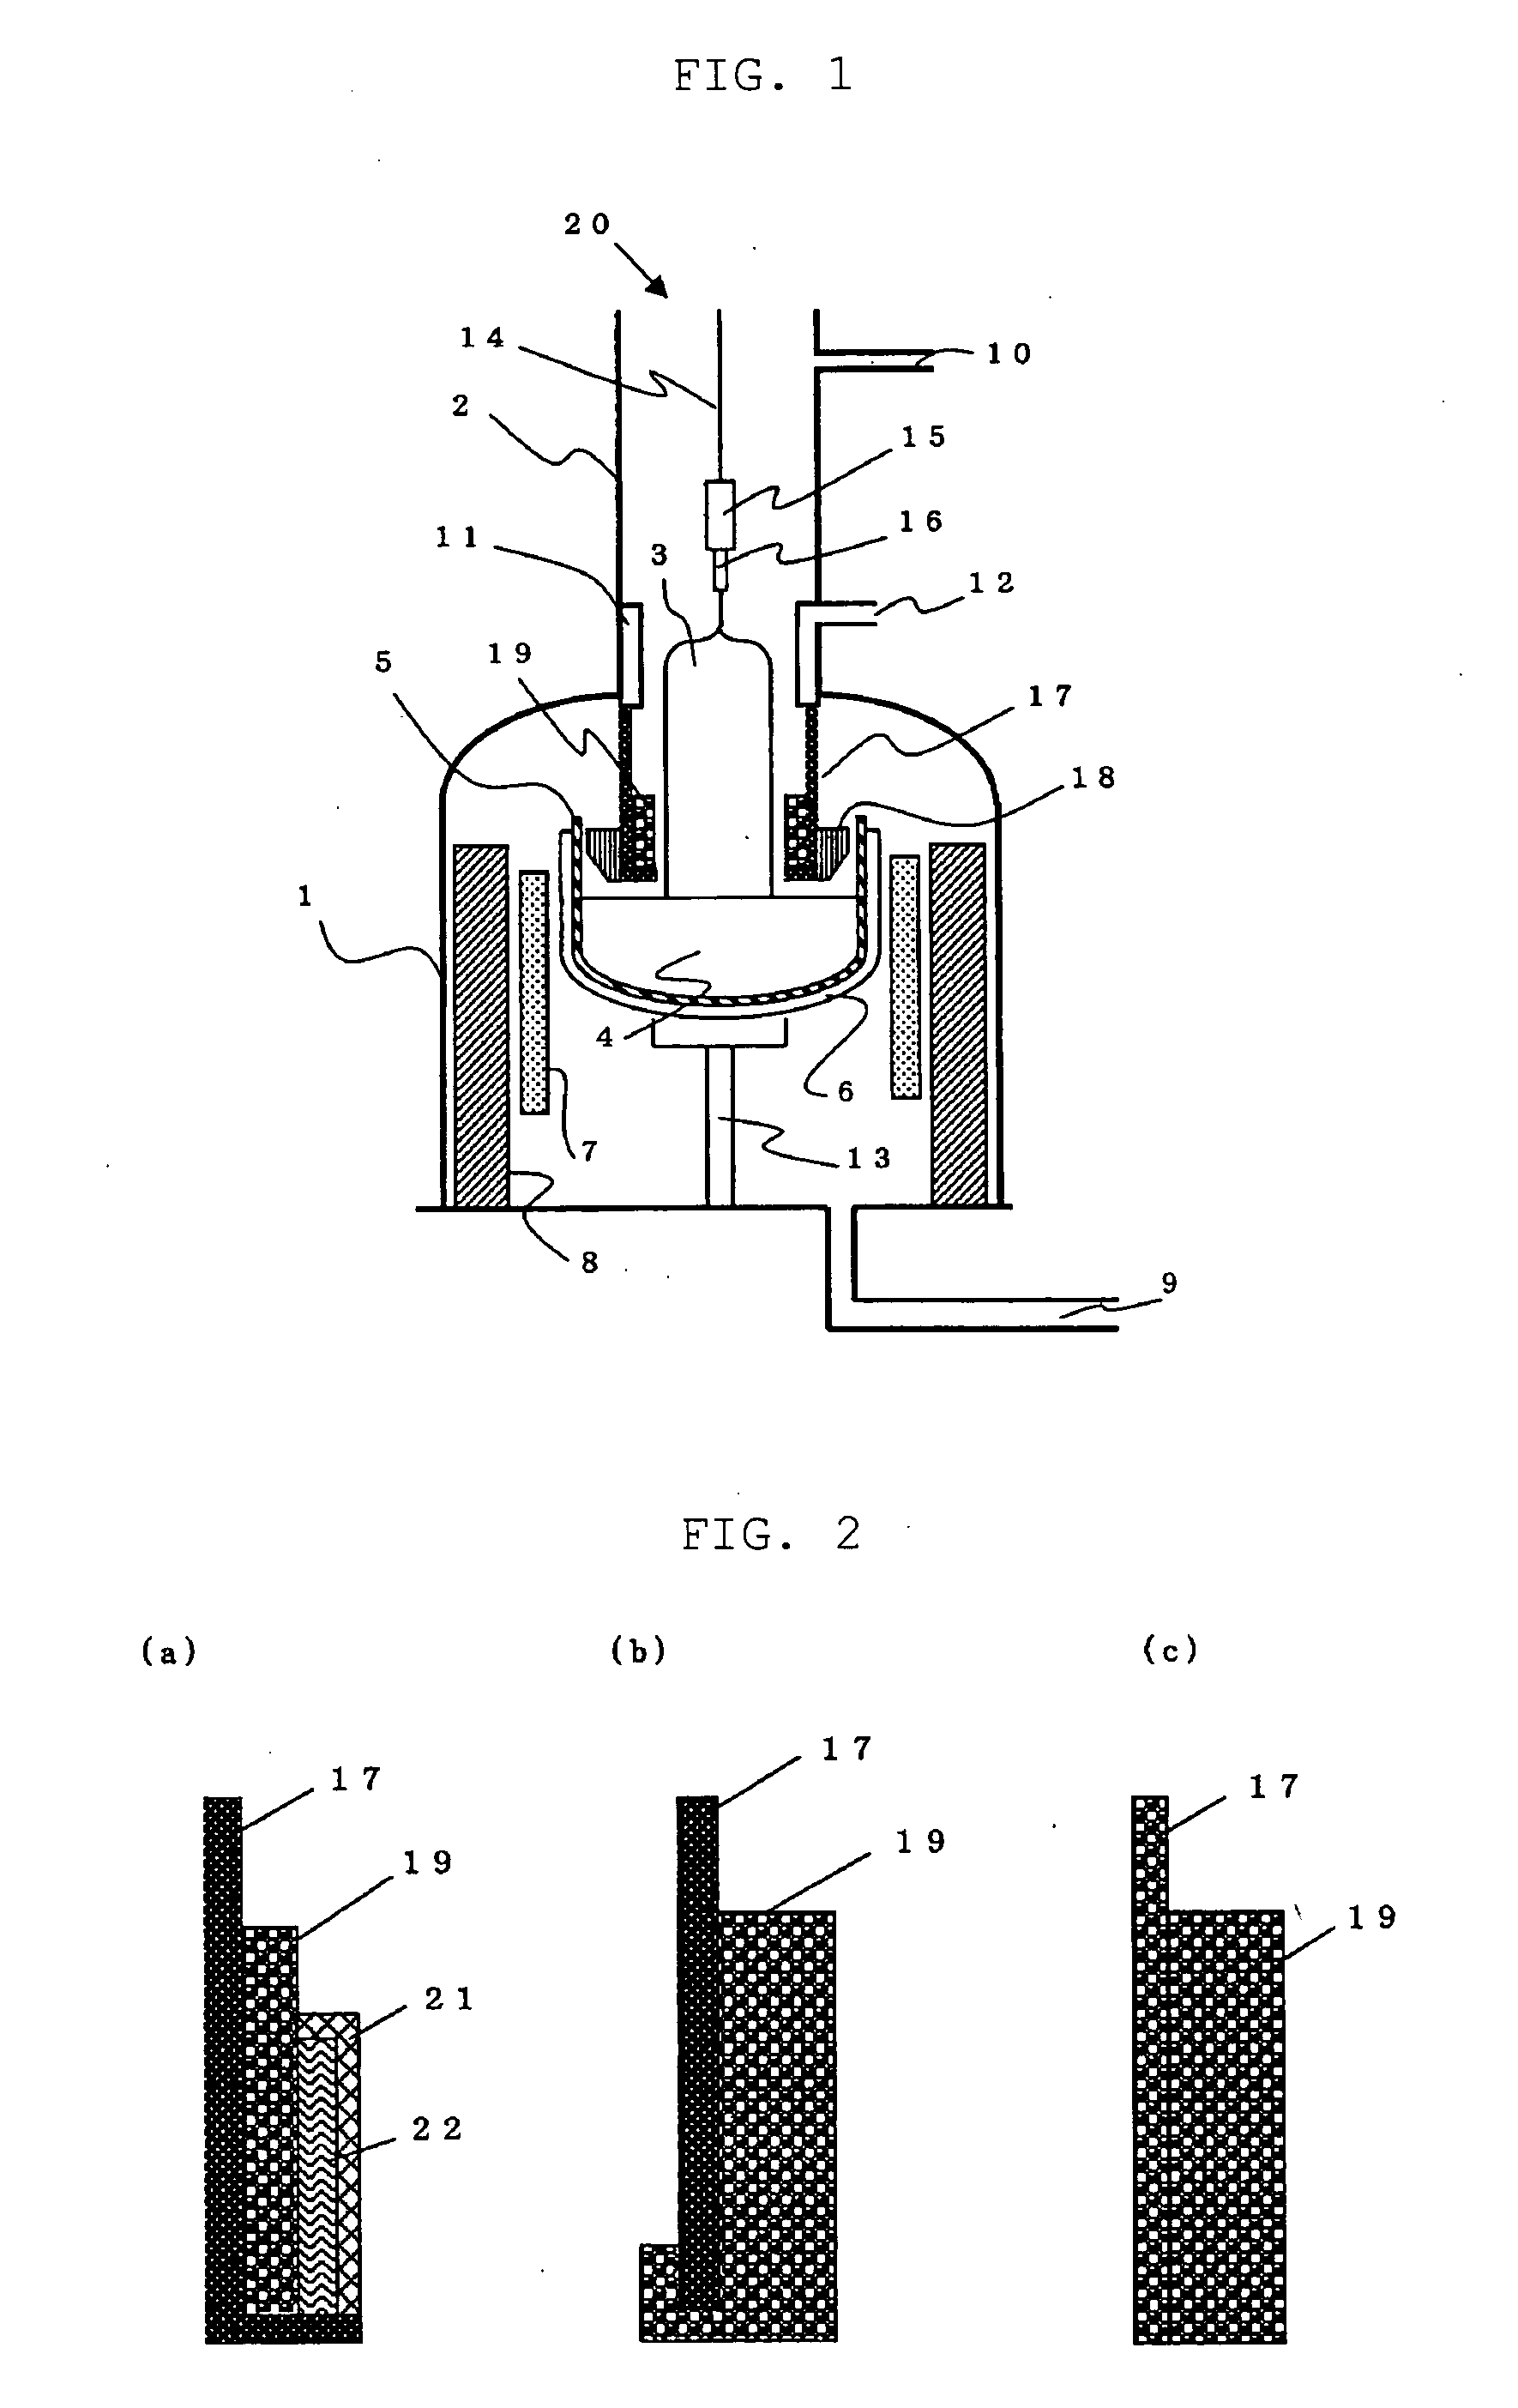 An Apparatus for Producing a Single Crystal